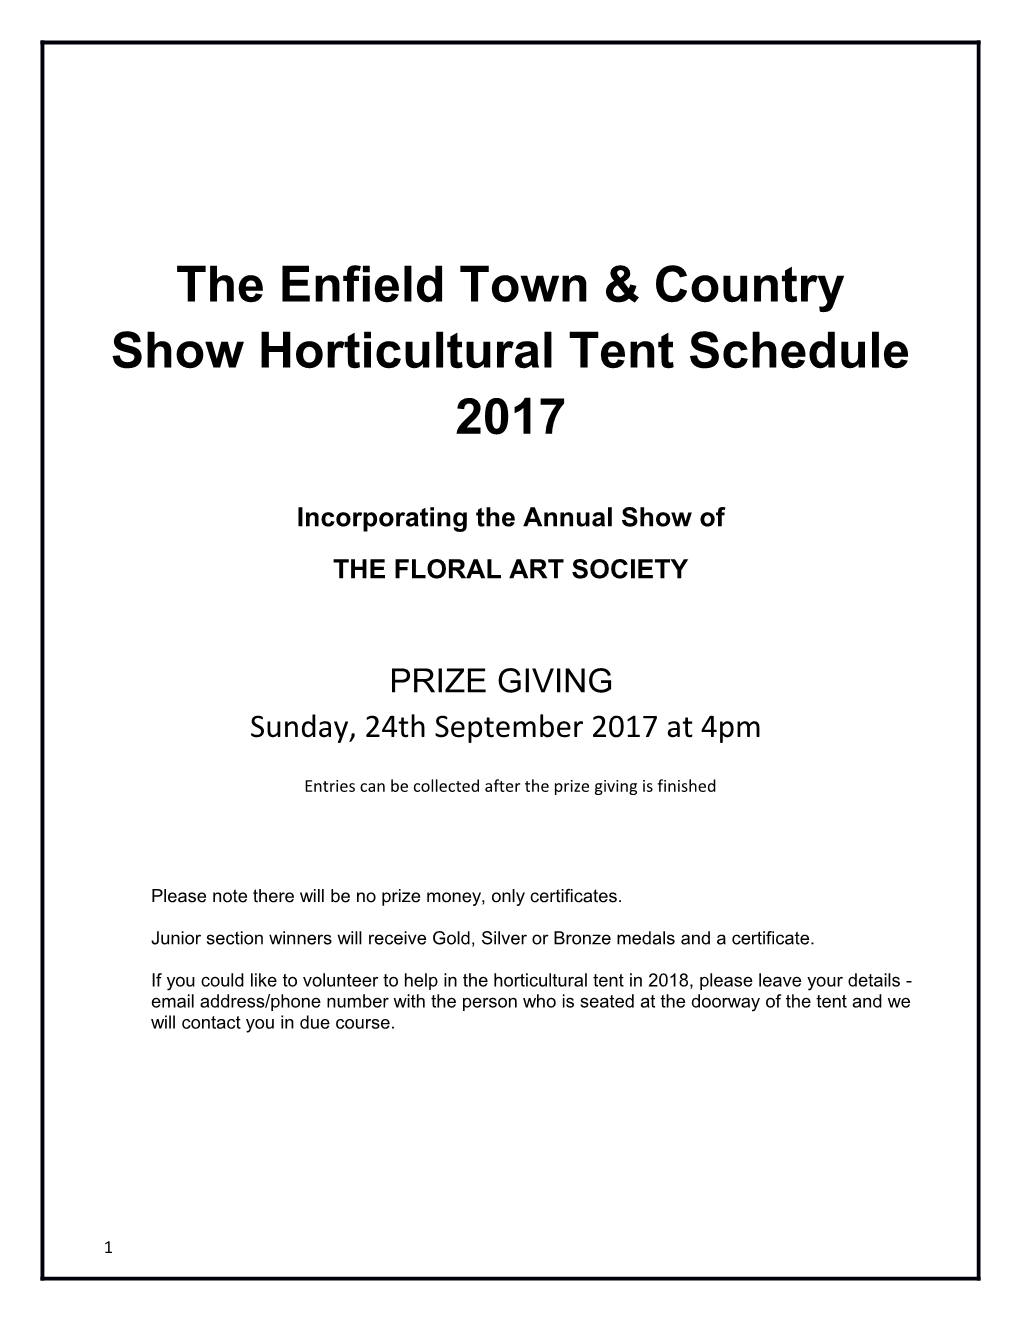 The Enfield Town & Country Show Horticultural Tent Schedule 2016